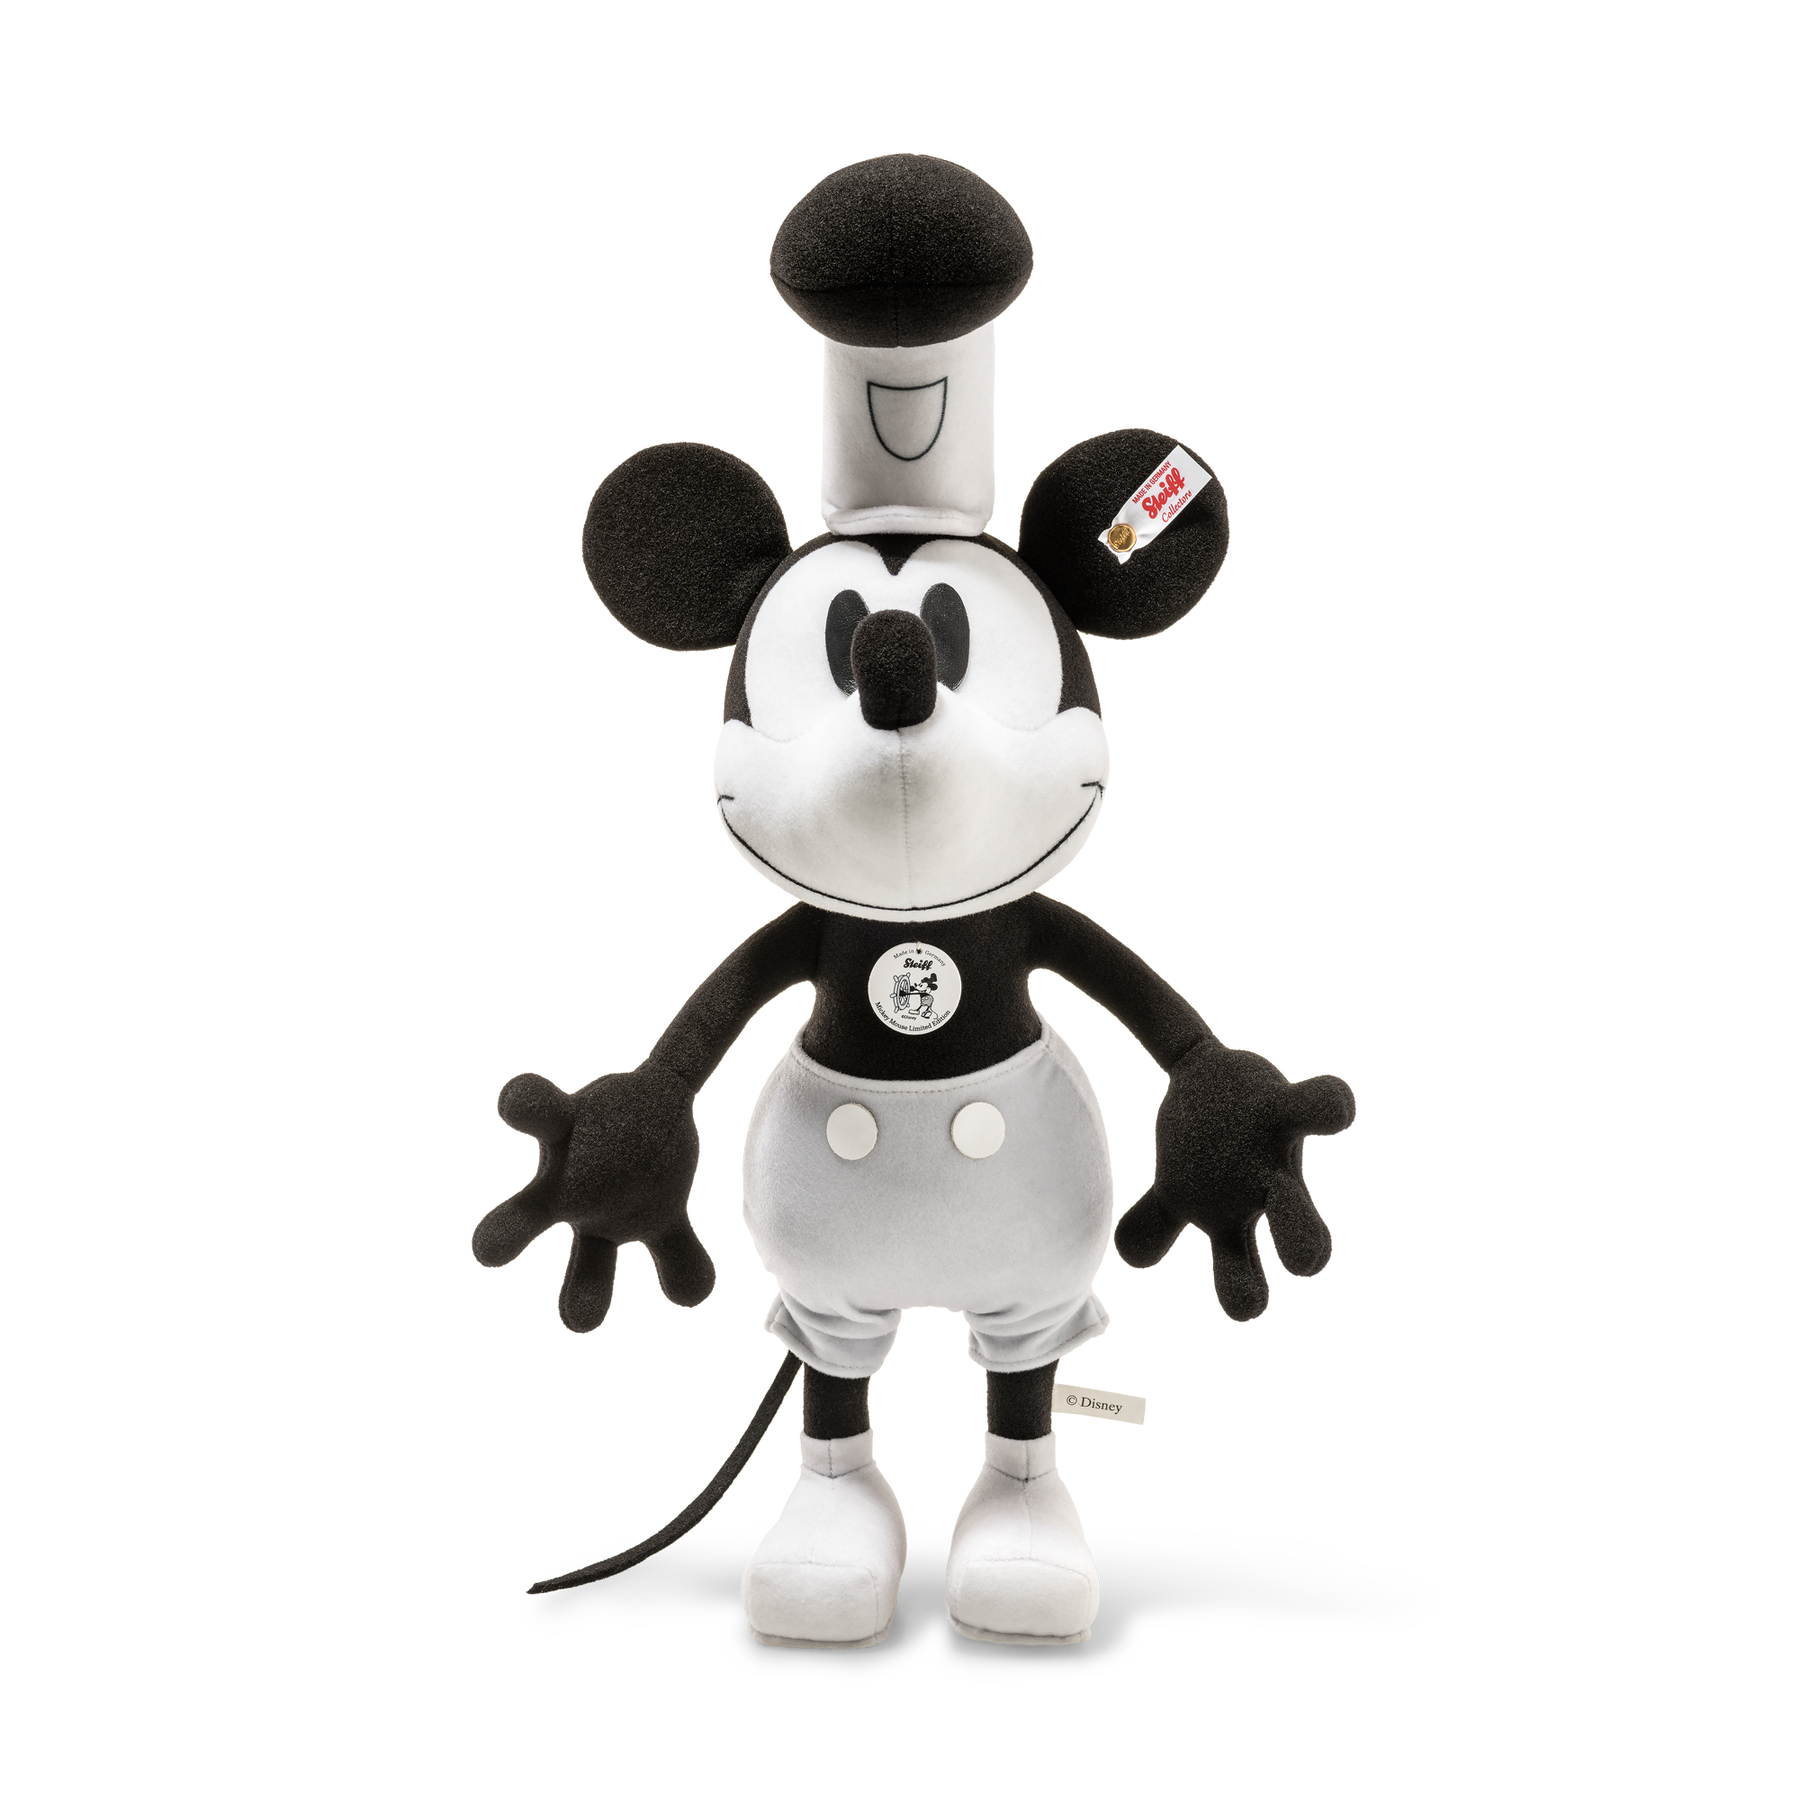 Disney Steamboat Willie – Mickey Mouse